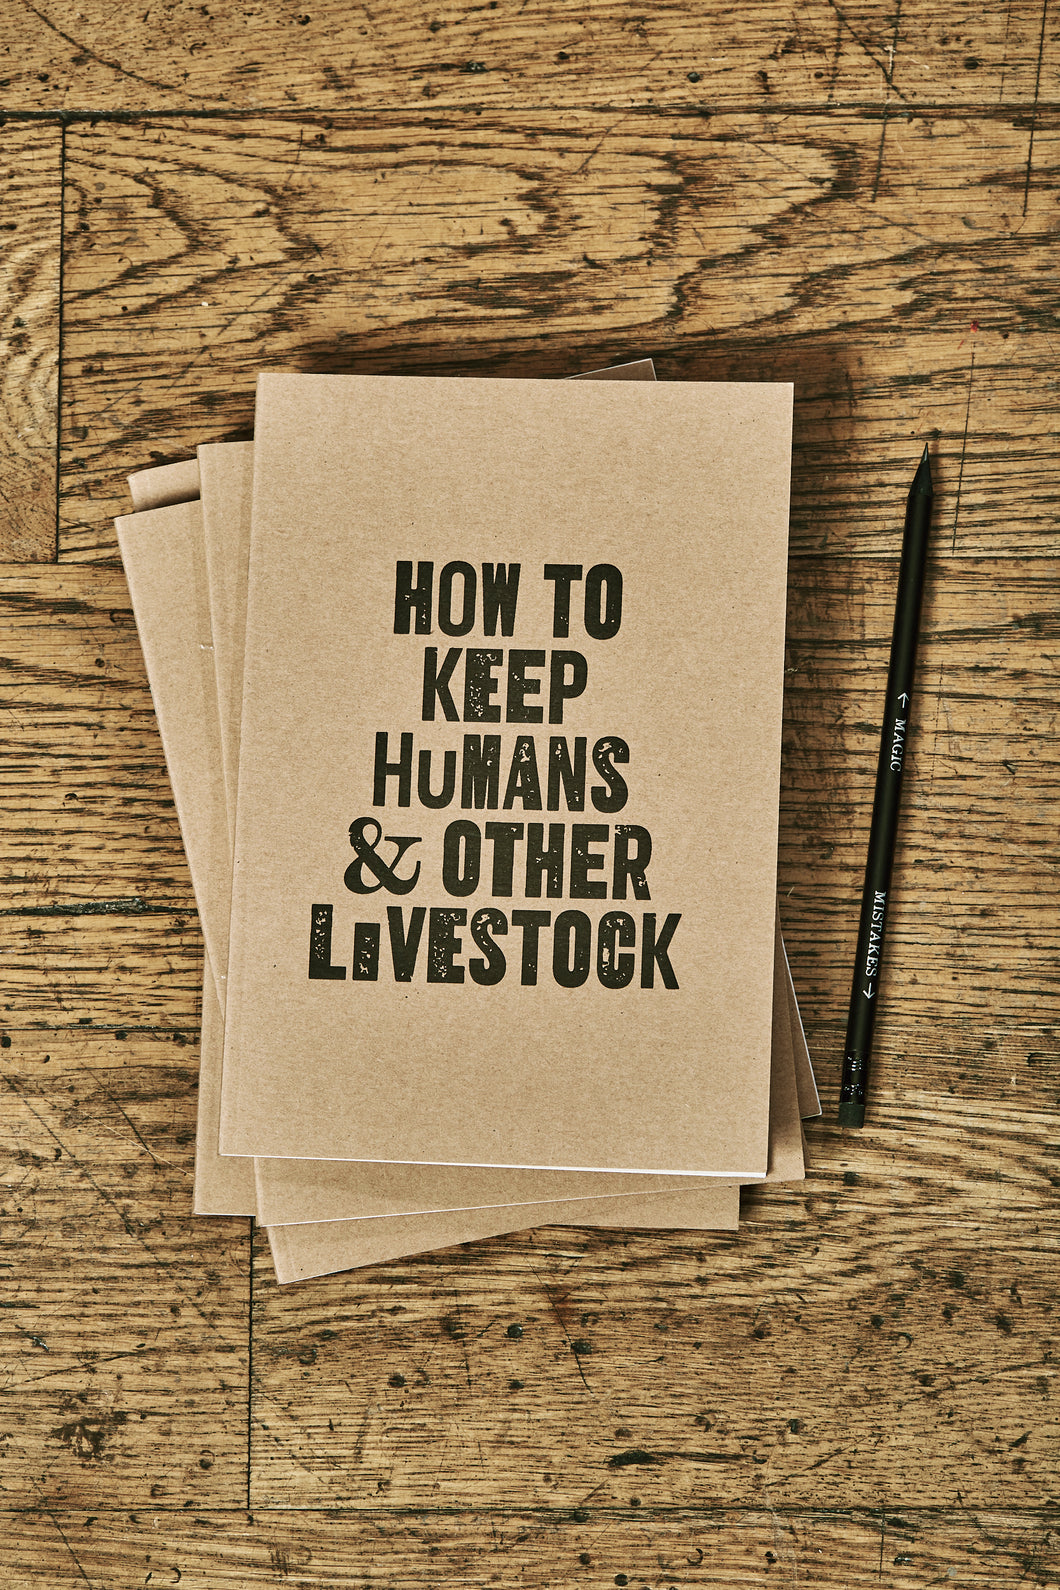 Image shows a few kraft card notebooks in a pile with the top one displaying the slogan HOW TO KEEP HUMANS & OTHER LIVESTOCK'. Notebooks are shown with a Word Wand pencil.